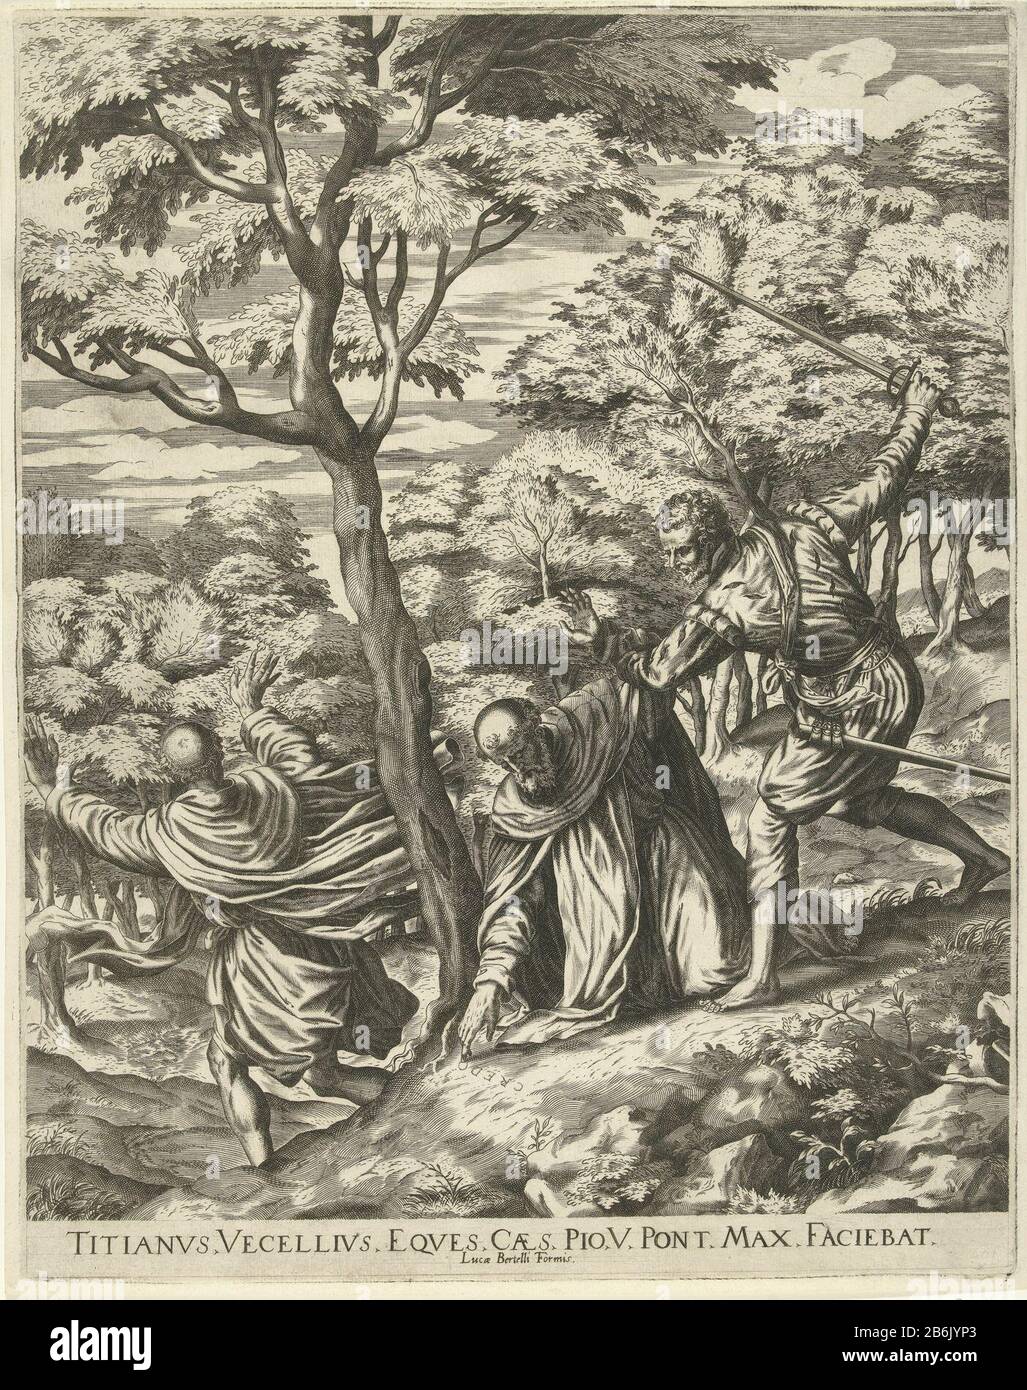 Death of Peter Martyr of Verona Saint Peter Martyr of Verona and a companion are in the forest haunted by a man with a heavy d. Peter fell to the ground and trying to defend himself. Just before his death, Peter wrote with his blood the words 'Credo in Deum 'in zand. Manufacturer : printmaker: anonymous printmaker Cornelis Cort (rejected attribution) to painting by Titian (listed building) Publisher: Luca Bertelli (listed object ) dedicated to Pius V (listed property) Place manufacture: printmaker Italy print Author: Italy to painting: Venice Publisher: Italy dedicated to: Vatican Date: 1566 - Stock Photo